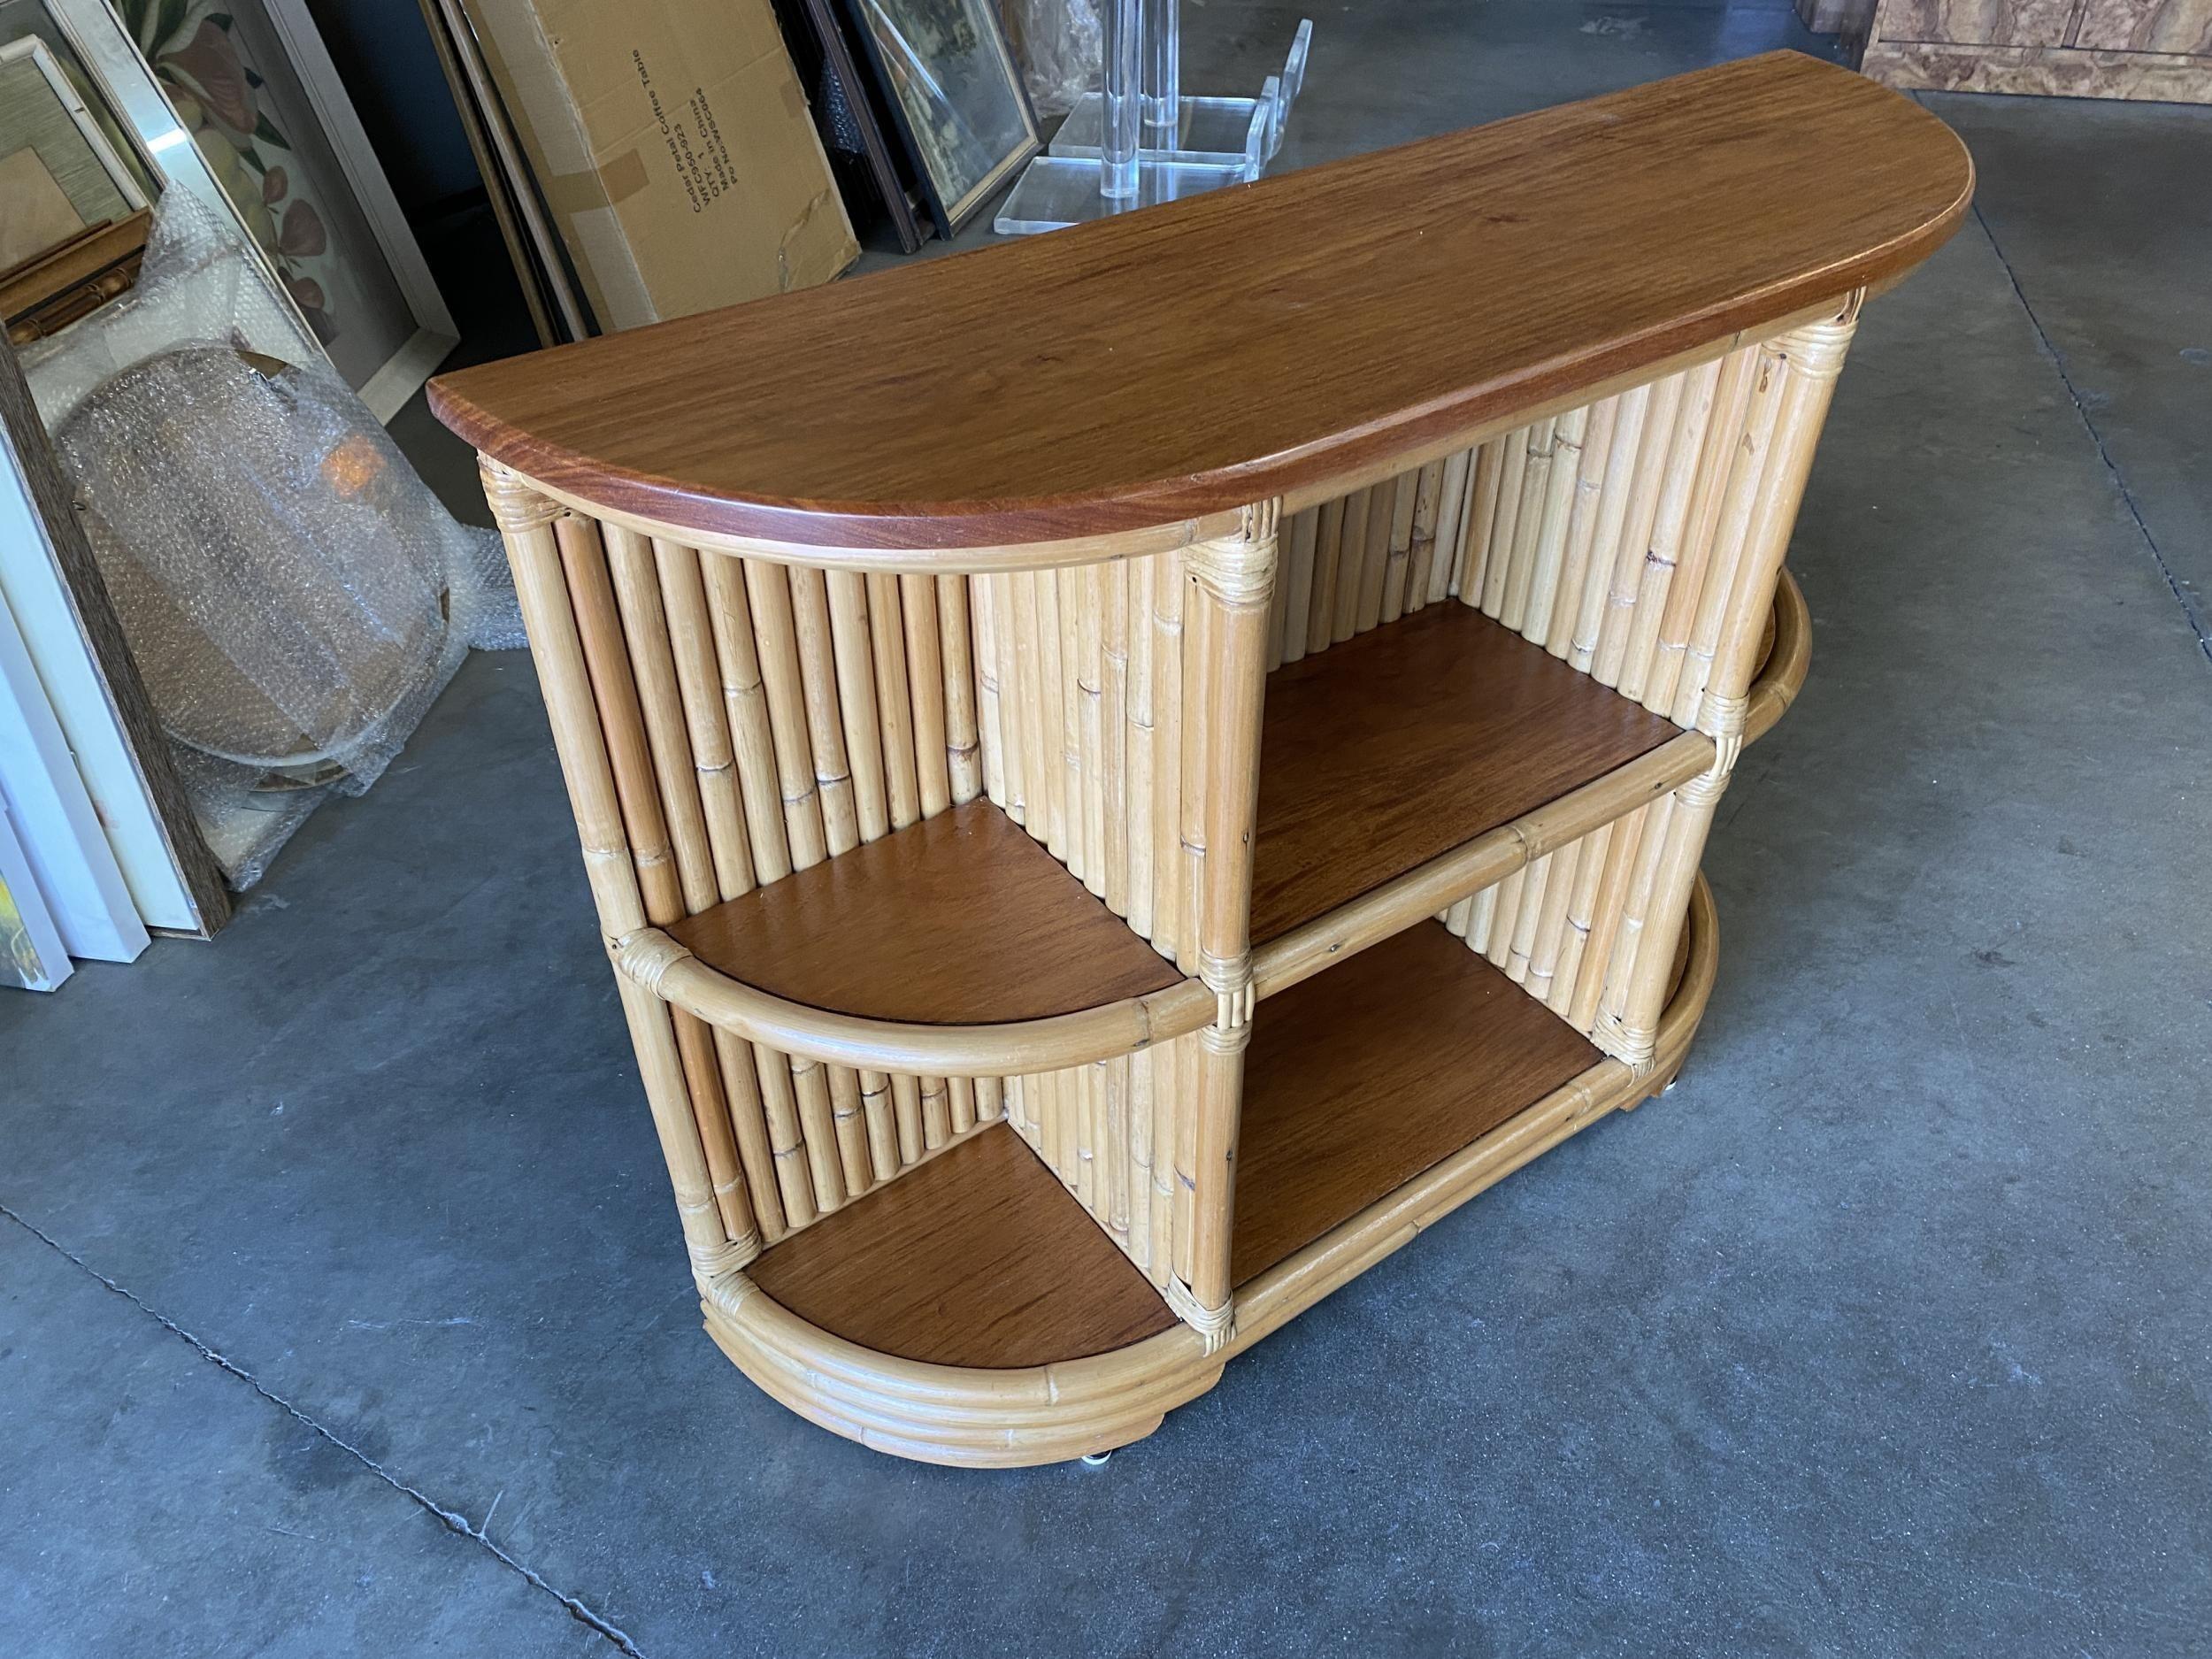 Circa 1940 6-tier rattan shelf/console table with mahogany shelving and tabletop. This small shelf doubles as a shelf and a console table, perfect for use as a focal point in a living room, lobby, or hallway.
1940, USA
We only purchase and sell only